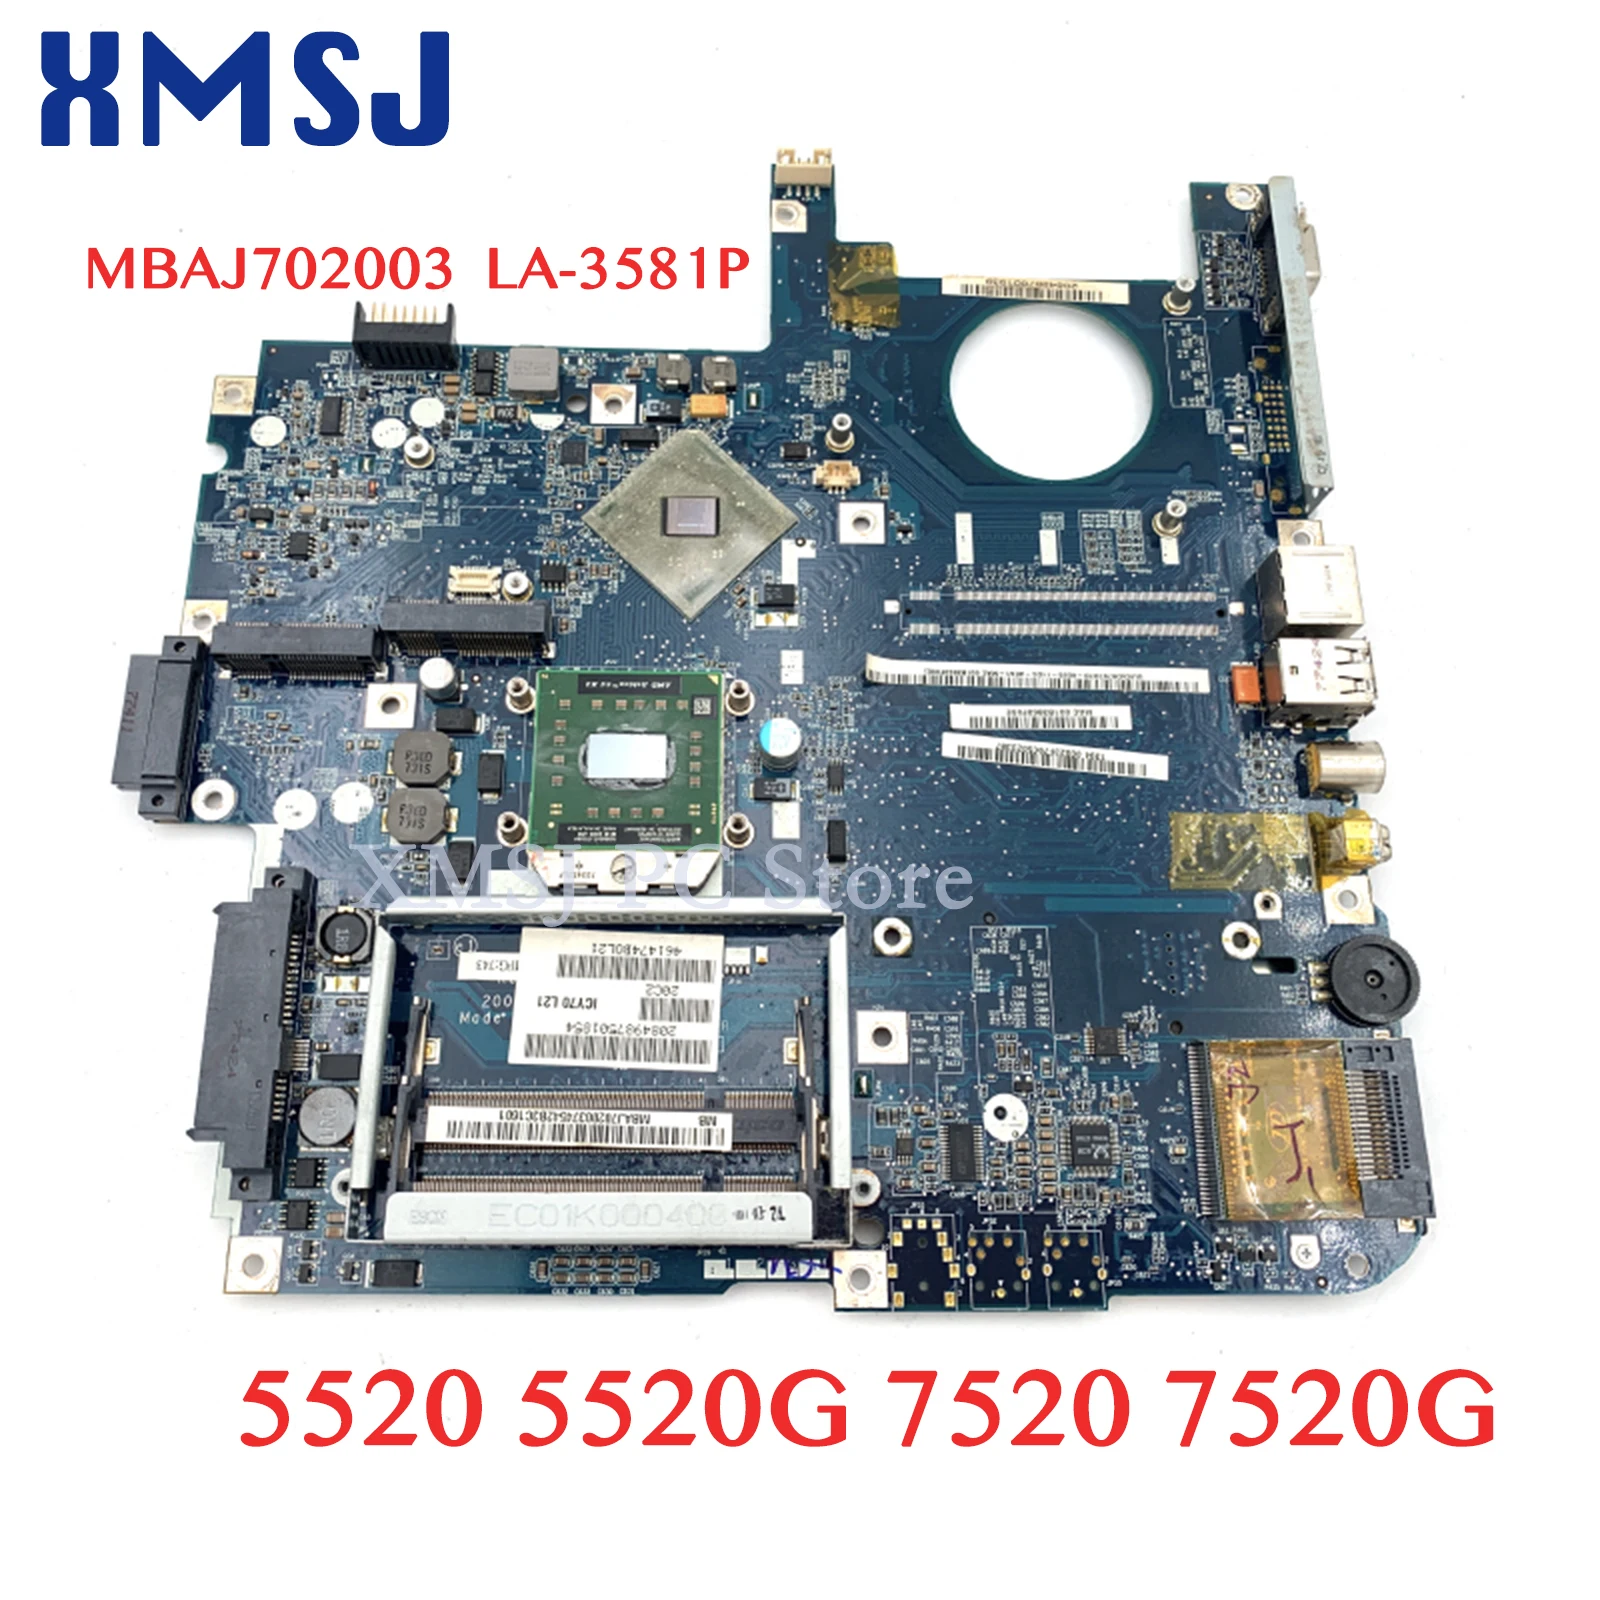 XMSJ MBAJ702003 ICW50 LA-3581P For ACER Aspire 5520 5520G 7520 7520G Laptop Motherboard DDR2 without GPU slot Main board